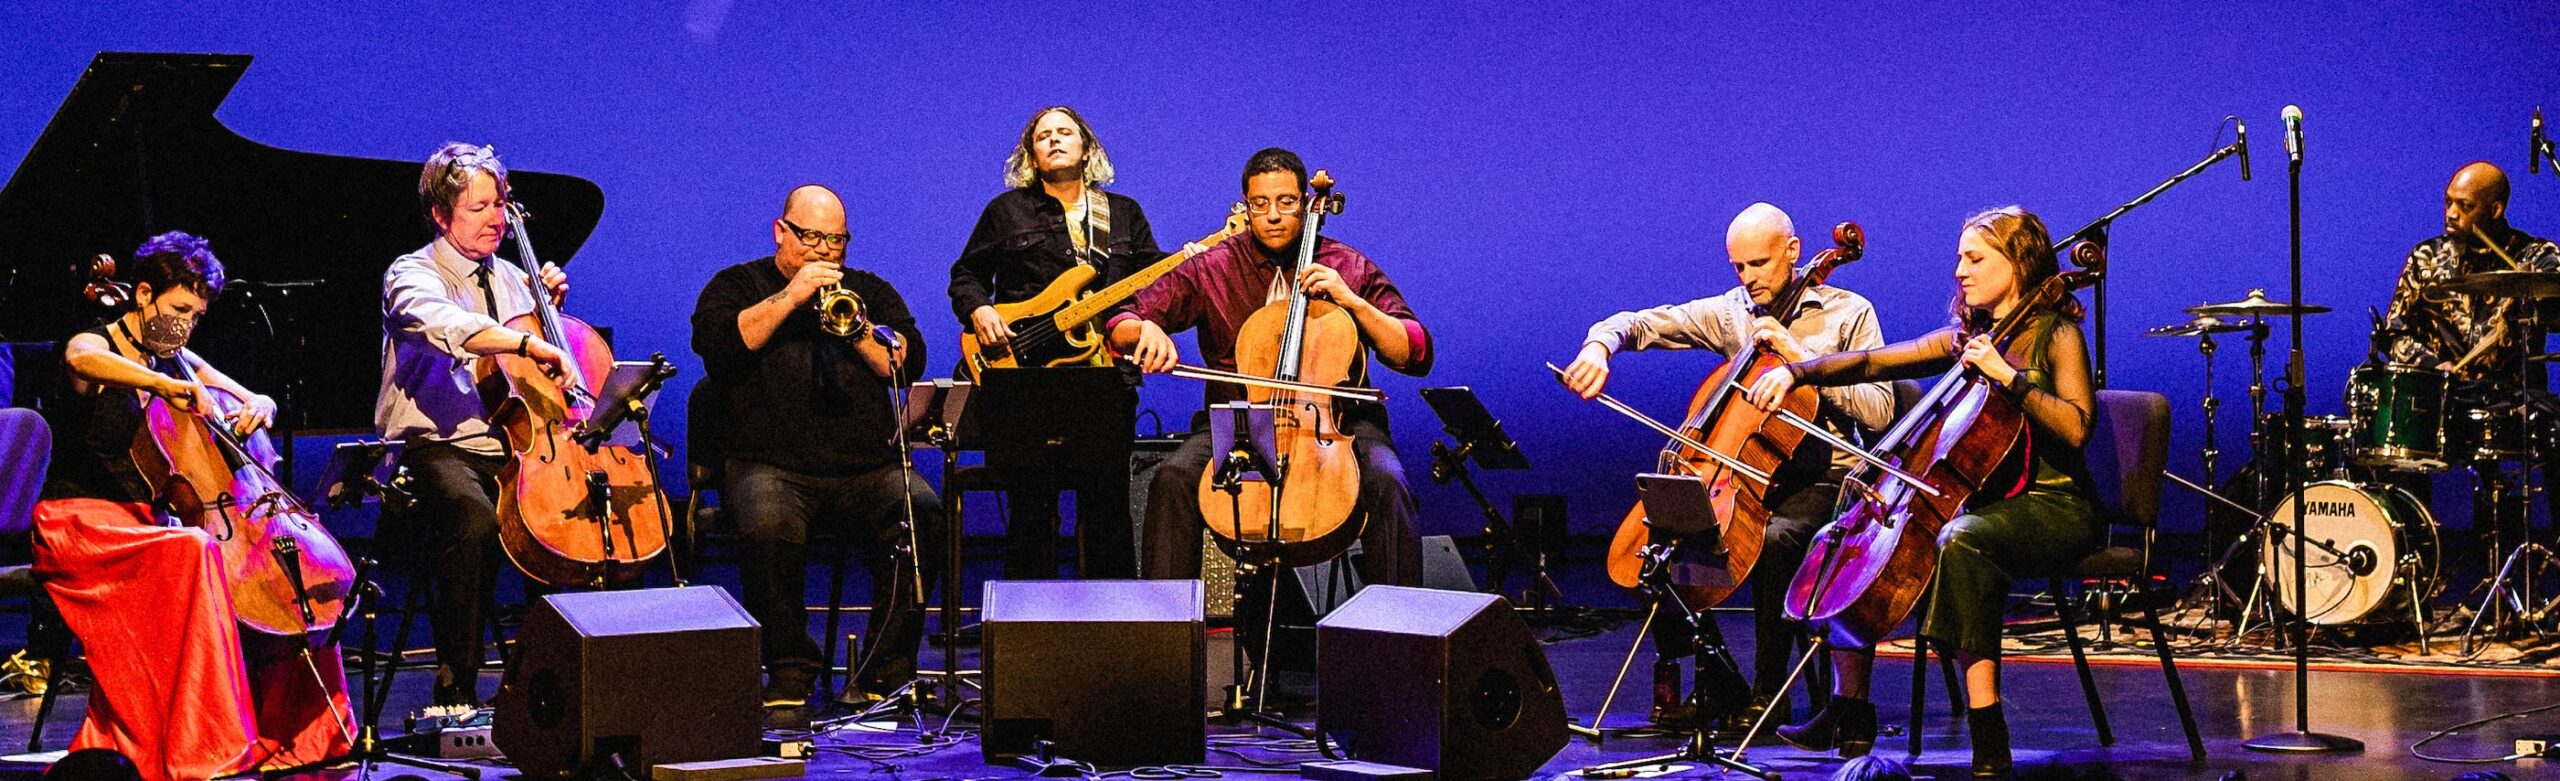 Win Tickets to Portland Cello Project in Missoula Image